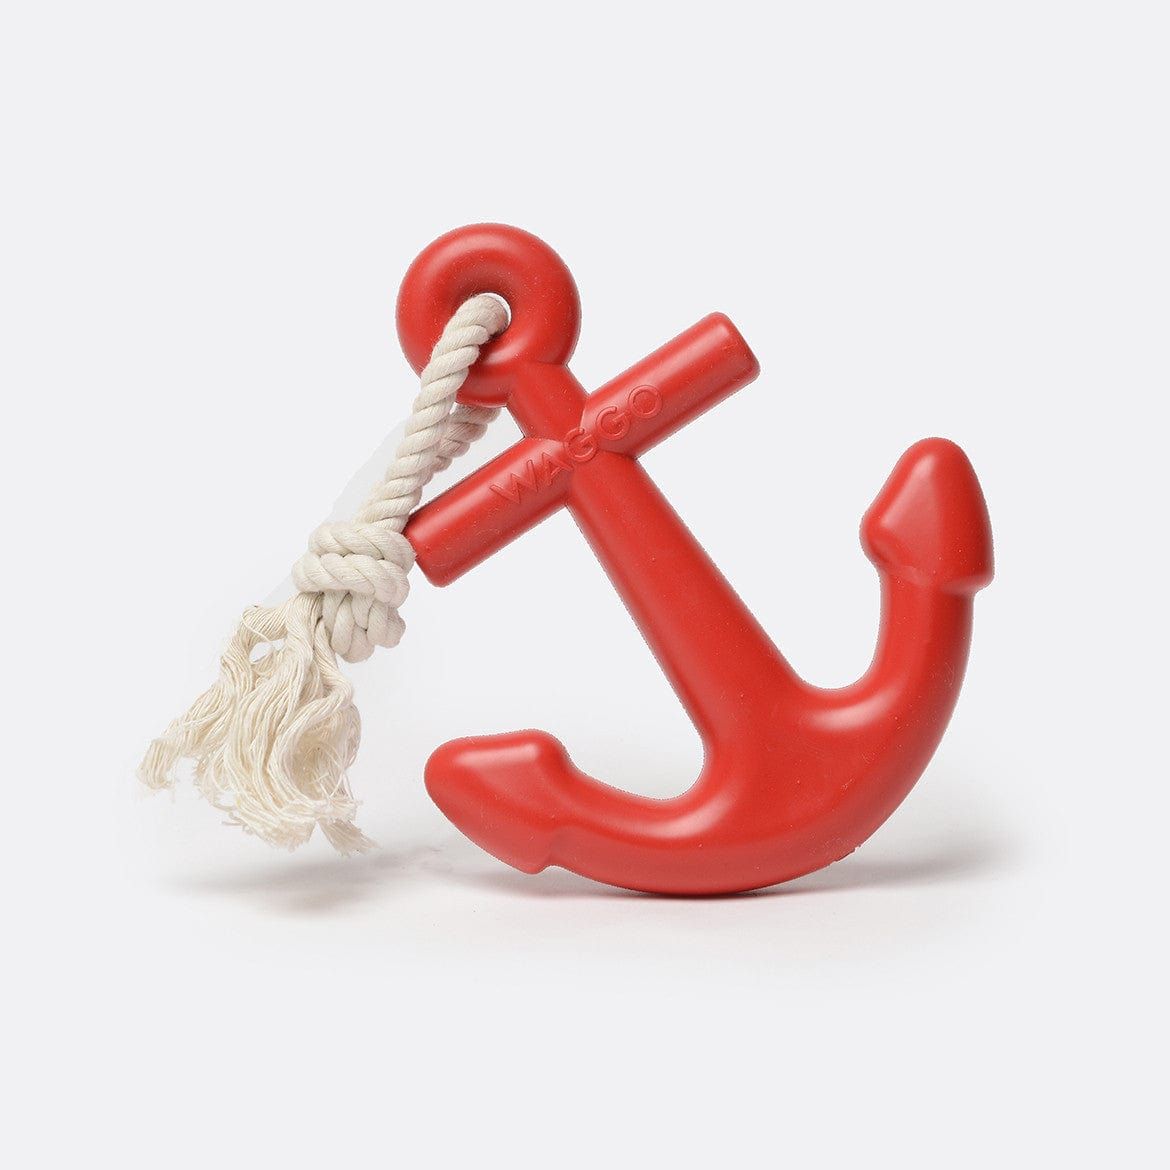 Waggo Cherry Anchor / Large Anchors Aweigh Rubber Dog Toy by Waggo